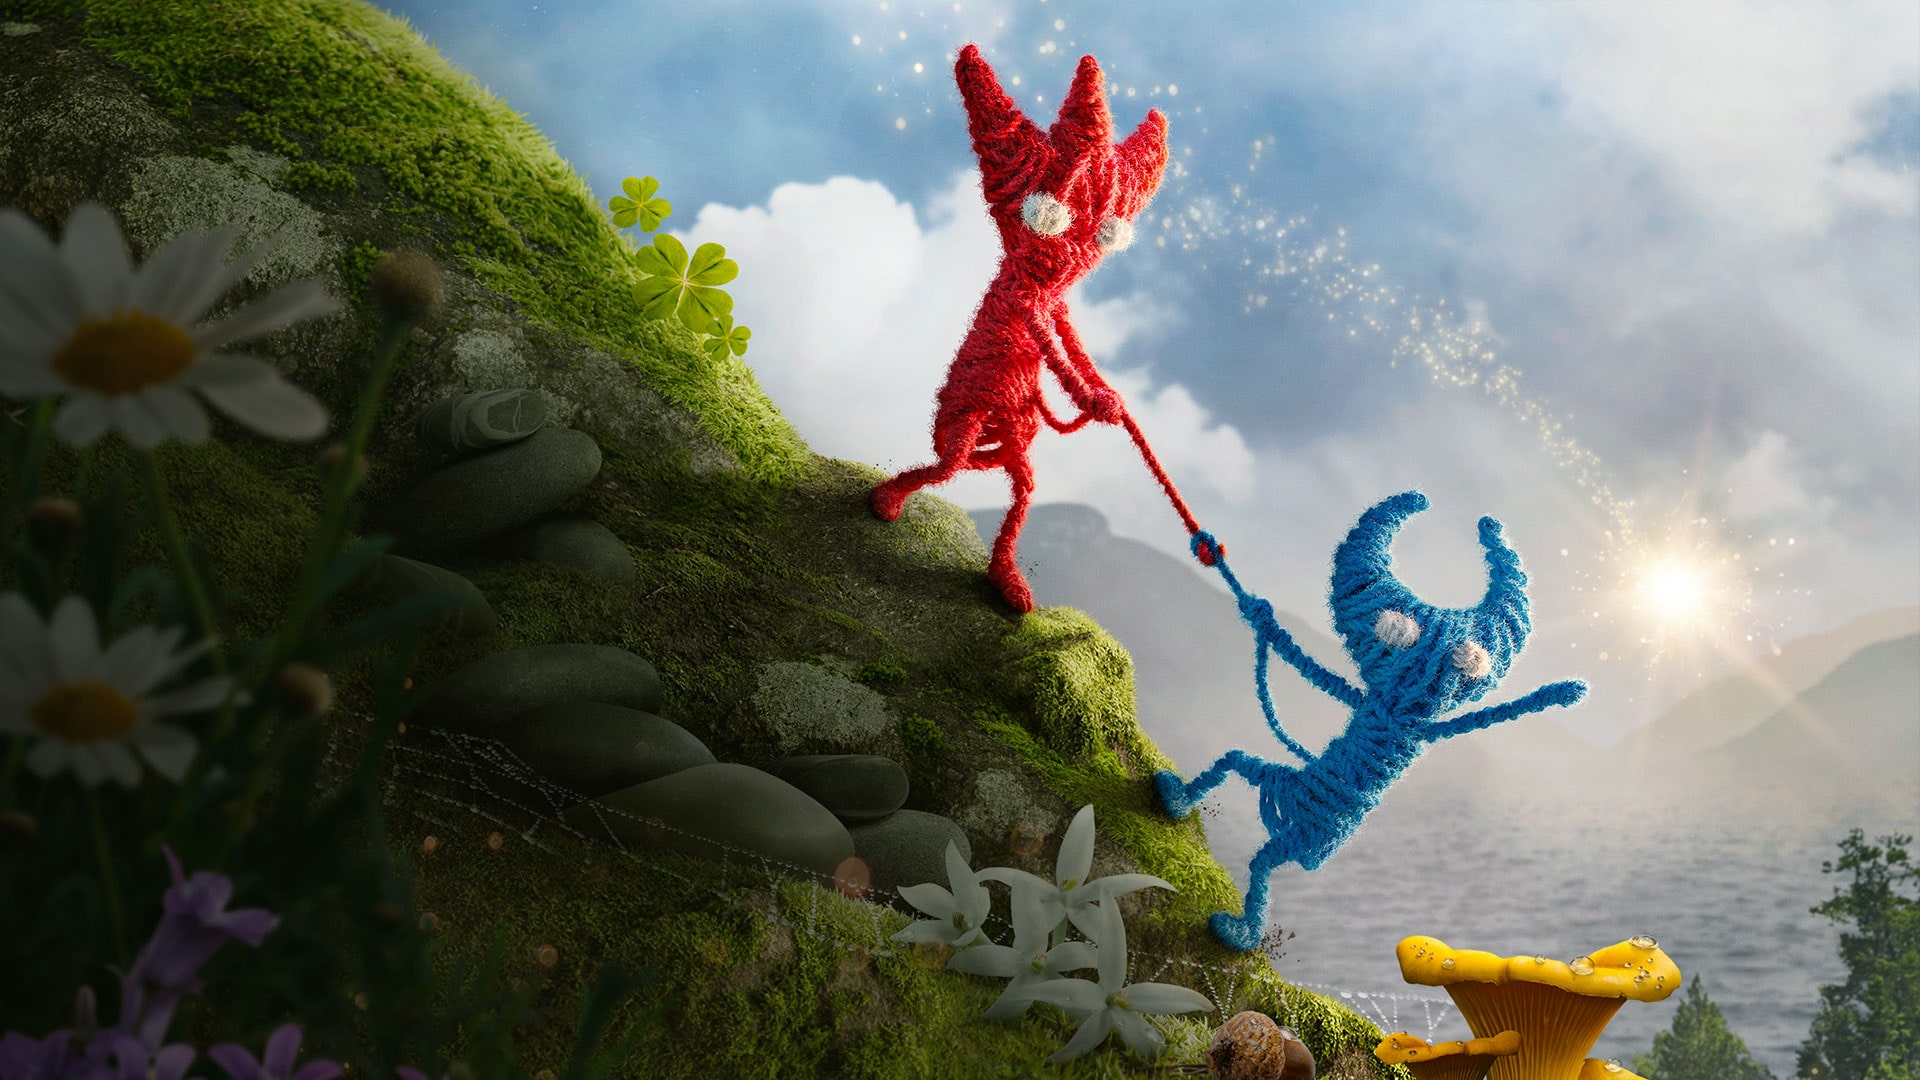 Pack Unravel Yarny